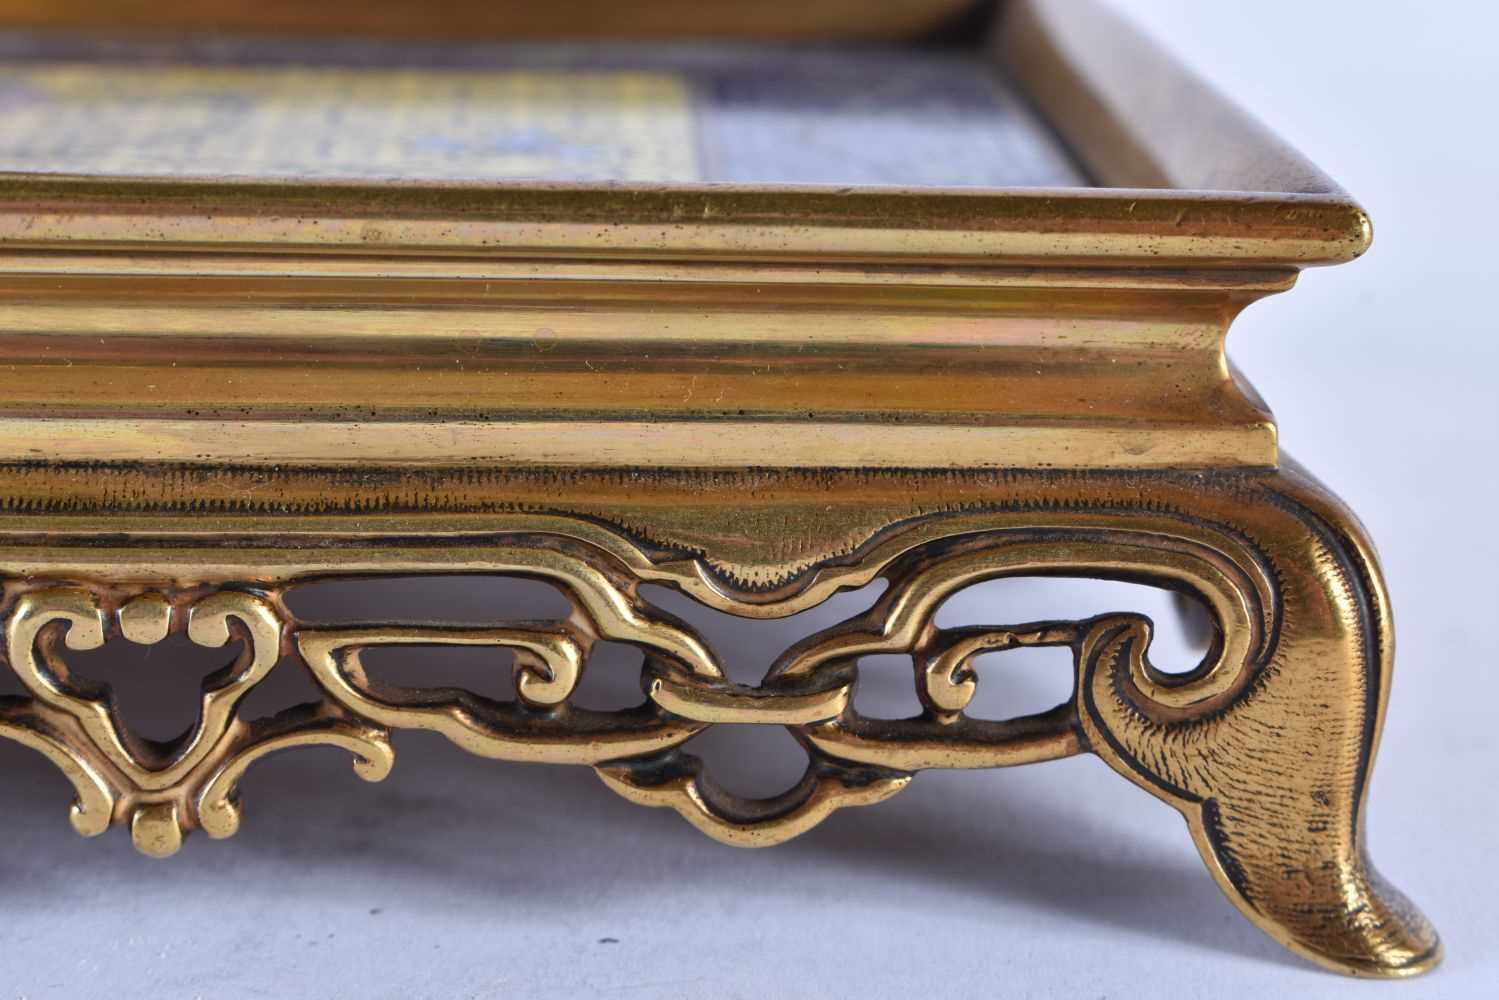 A FINE 19TH CENTURY FRENCH BRONZE AND CHAMPLEVE ENAMEL DESK GARNITURE in the manner of - Image 6 of 14